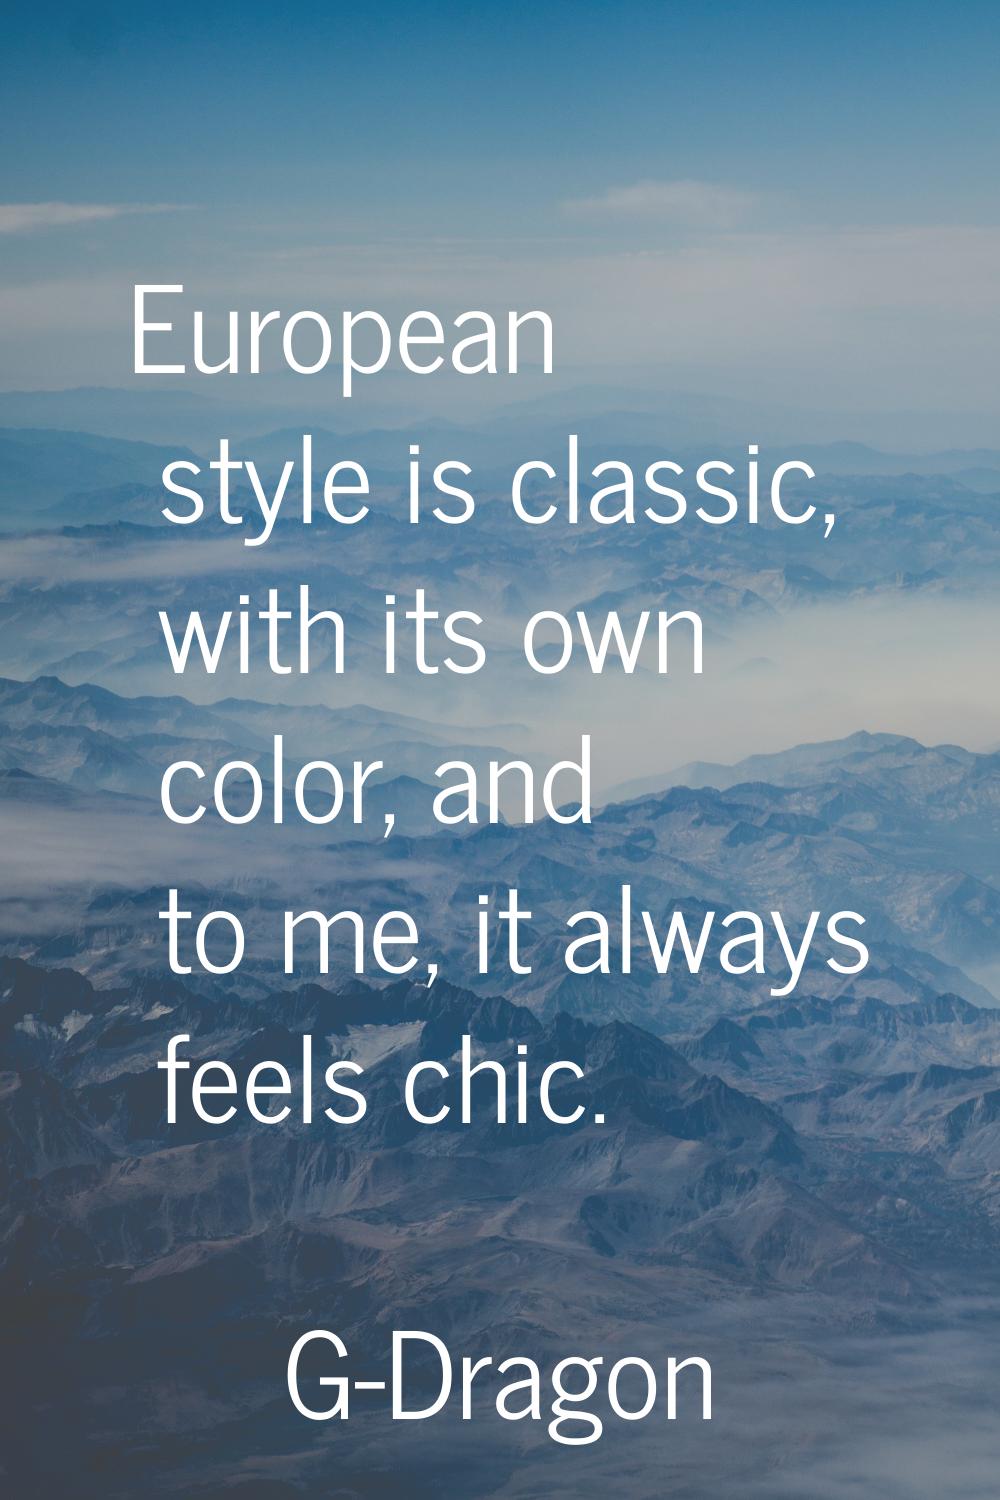 European style is classic, with its own color, and to me, it always feels chic.